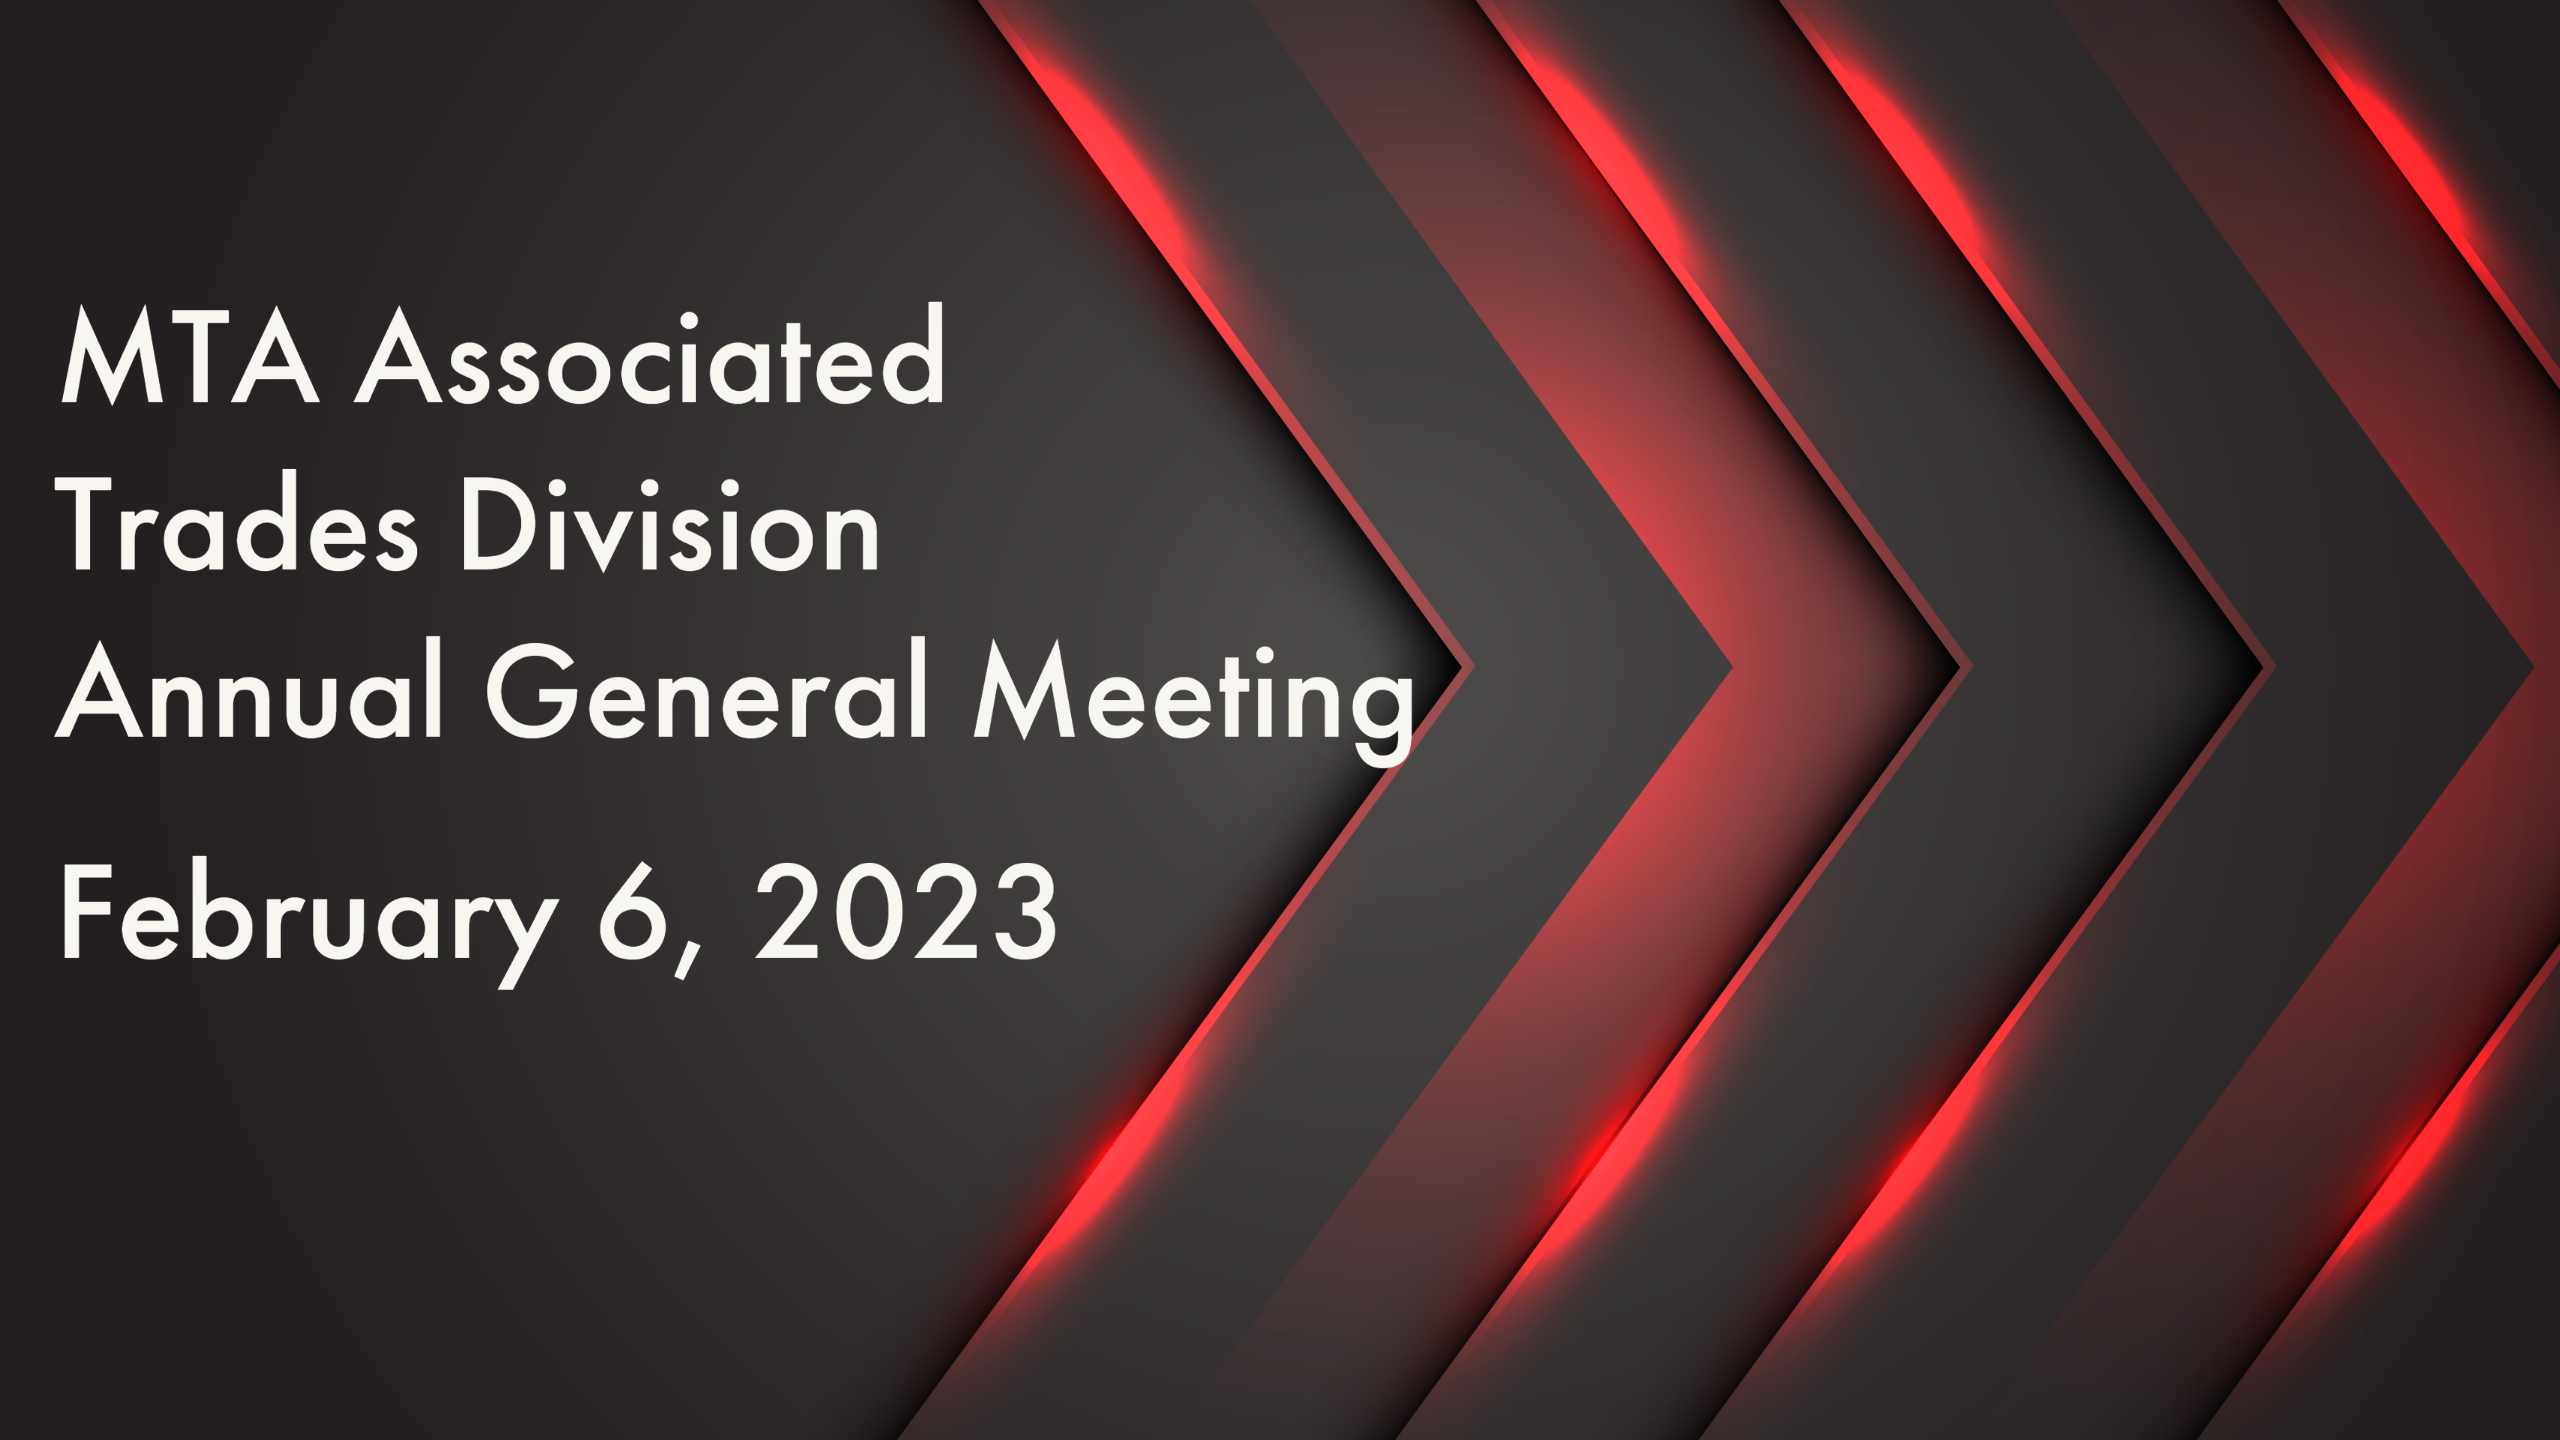 MTA Associated Trades Division Annual General Meeting February 6, 2023